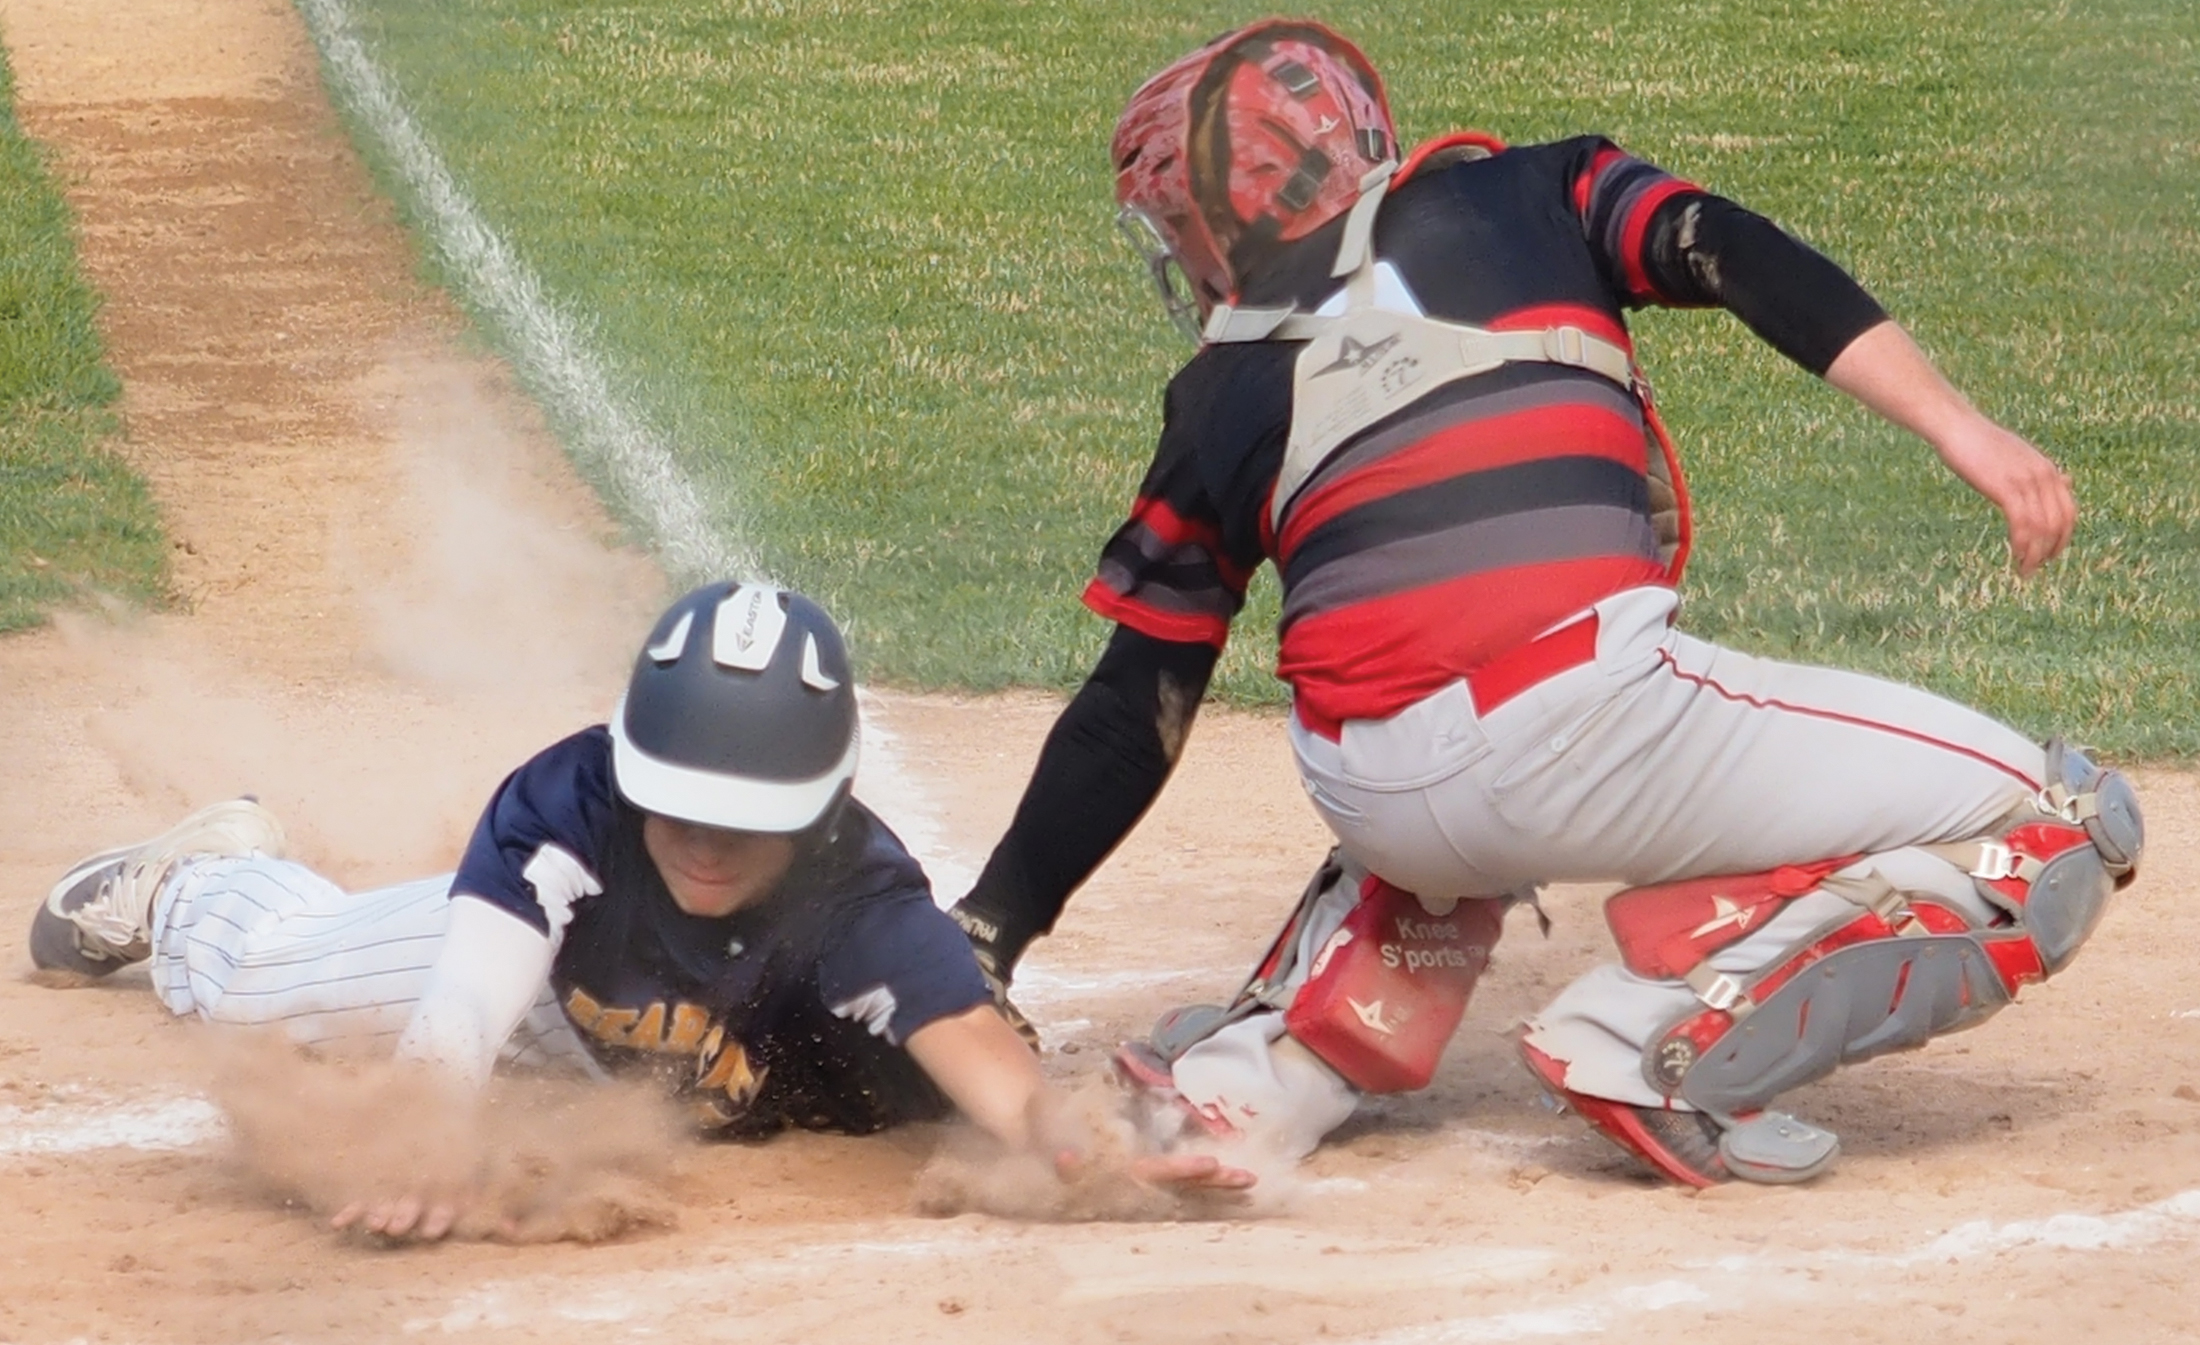 North Butler eliminated in Class 1A district semis by West Fork, 4-0